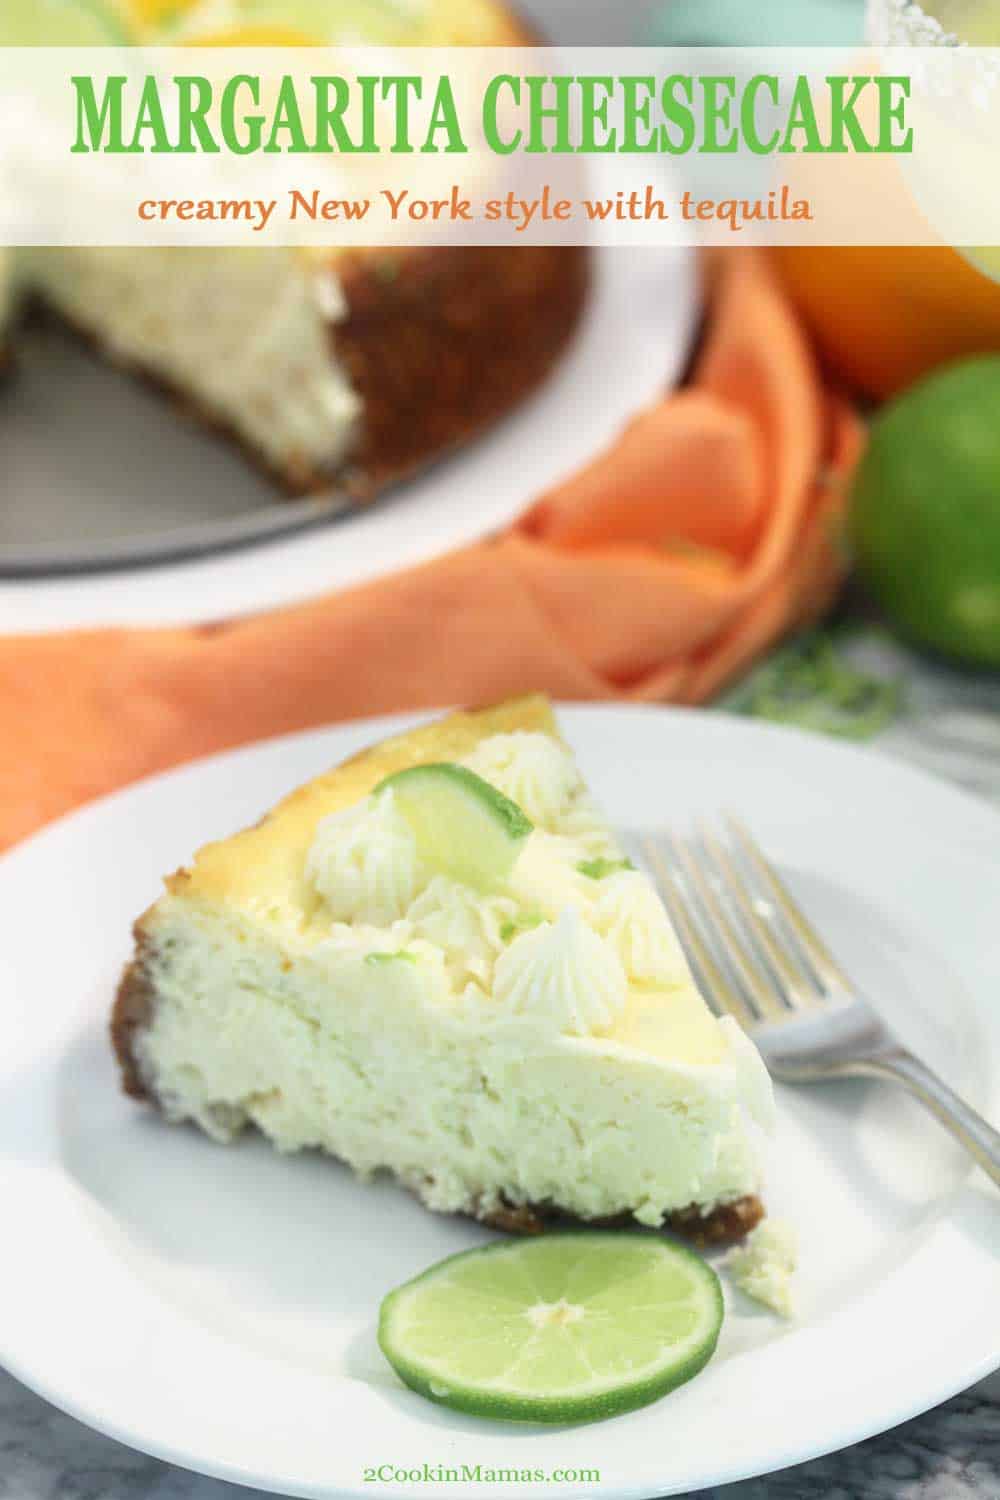 Margarita Cheesecake 2 | 2 Cookin Mamas Creamy and rich Margarita Cheesecake has all the flavors of your favorite margarita. A New York style cheesecake made with the traditional cream cheese and sour cream then flavored with orange and lime zest and a few shots of tequila and Grand Marnier. The perfect dessert for the warm days of summer and a delicious addition to any Cinco de Mayo celebration. #cheesecake #margarita #NewYork #recipe #dessert #homemade